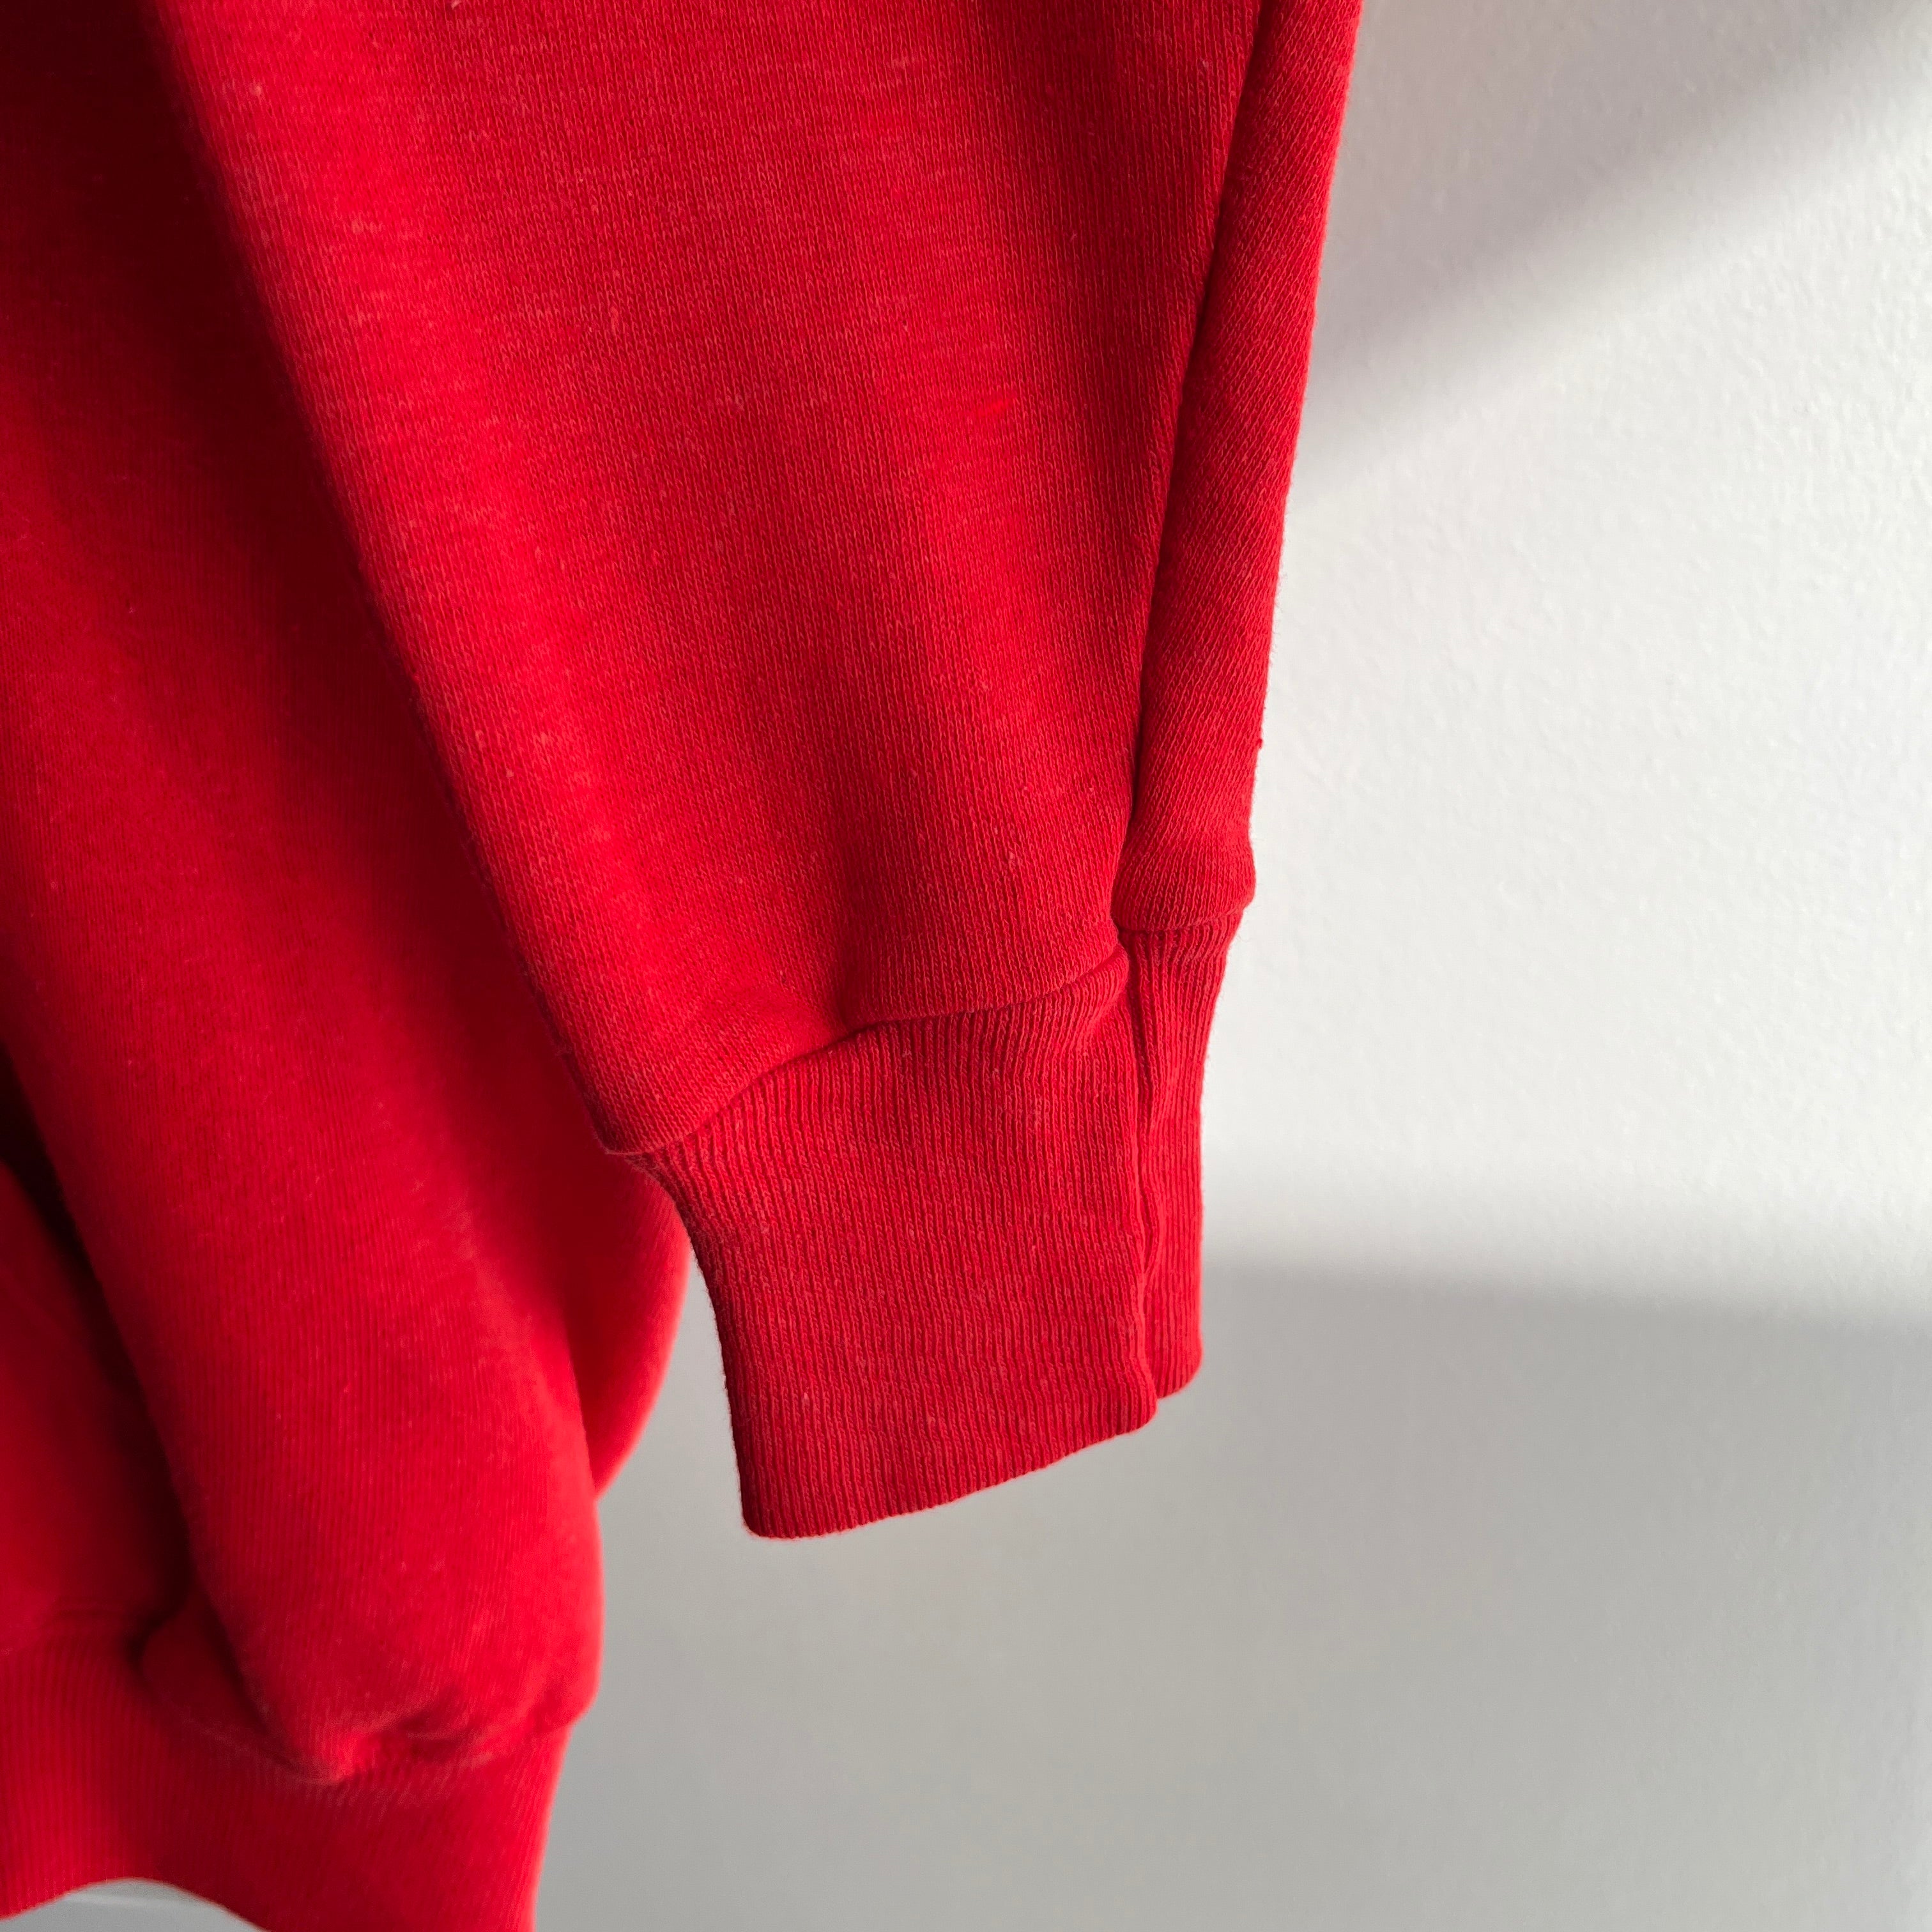 1970s Super Rad Red Soft Hoodie with Epic Ink (?) Staining on the Backside